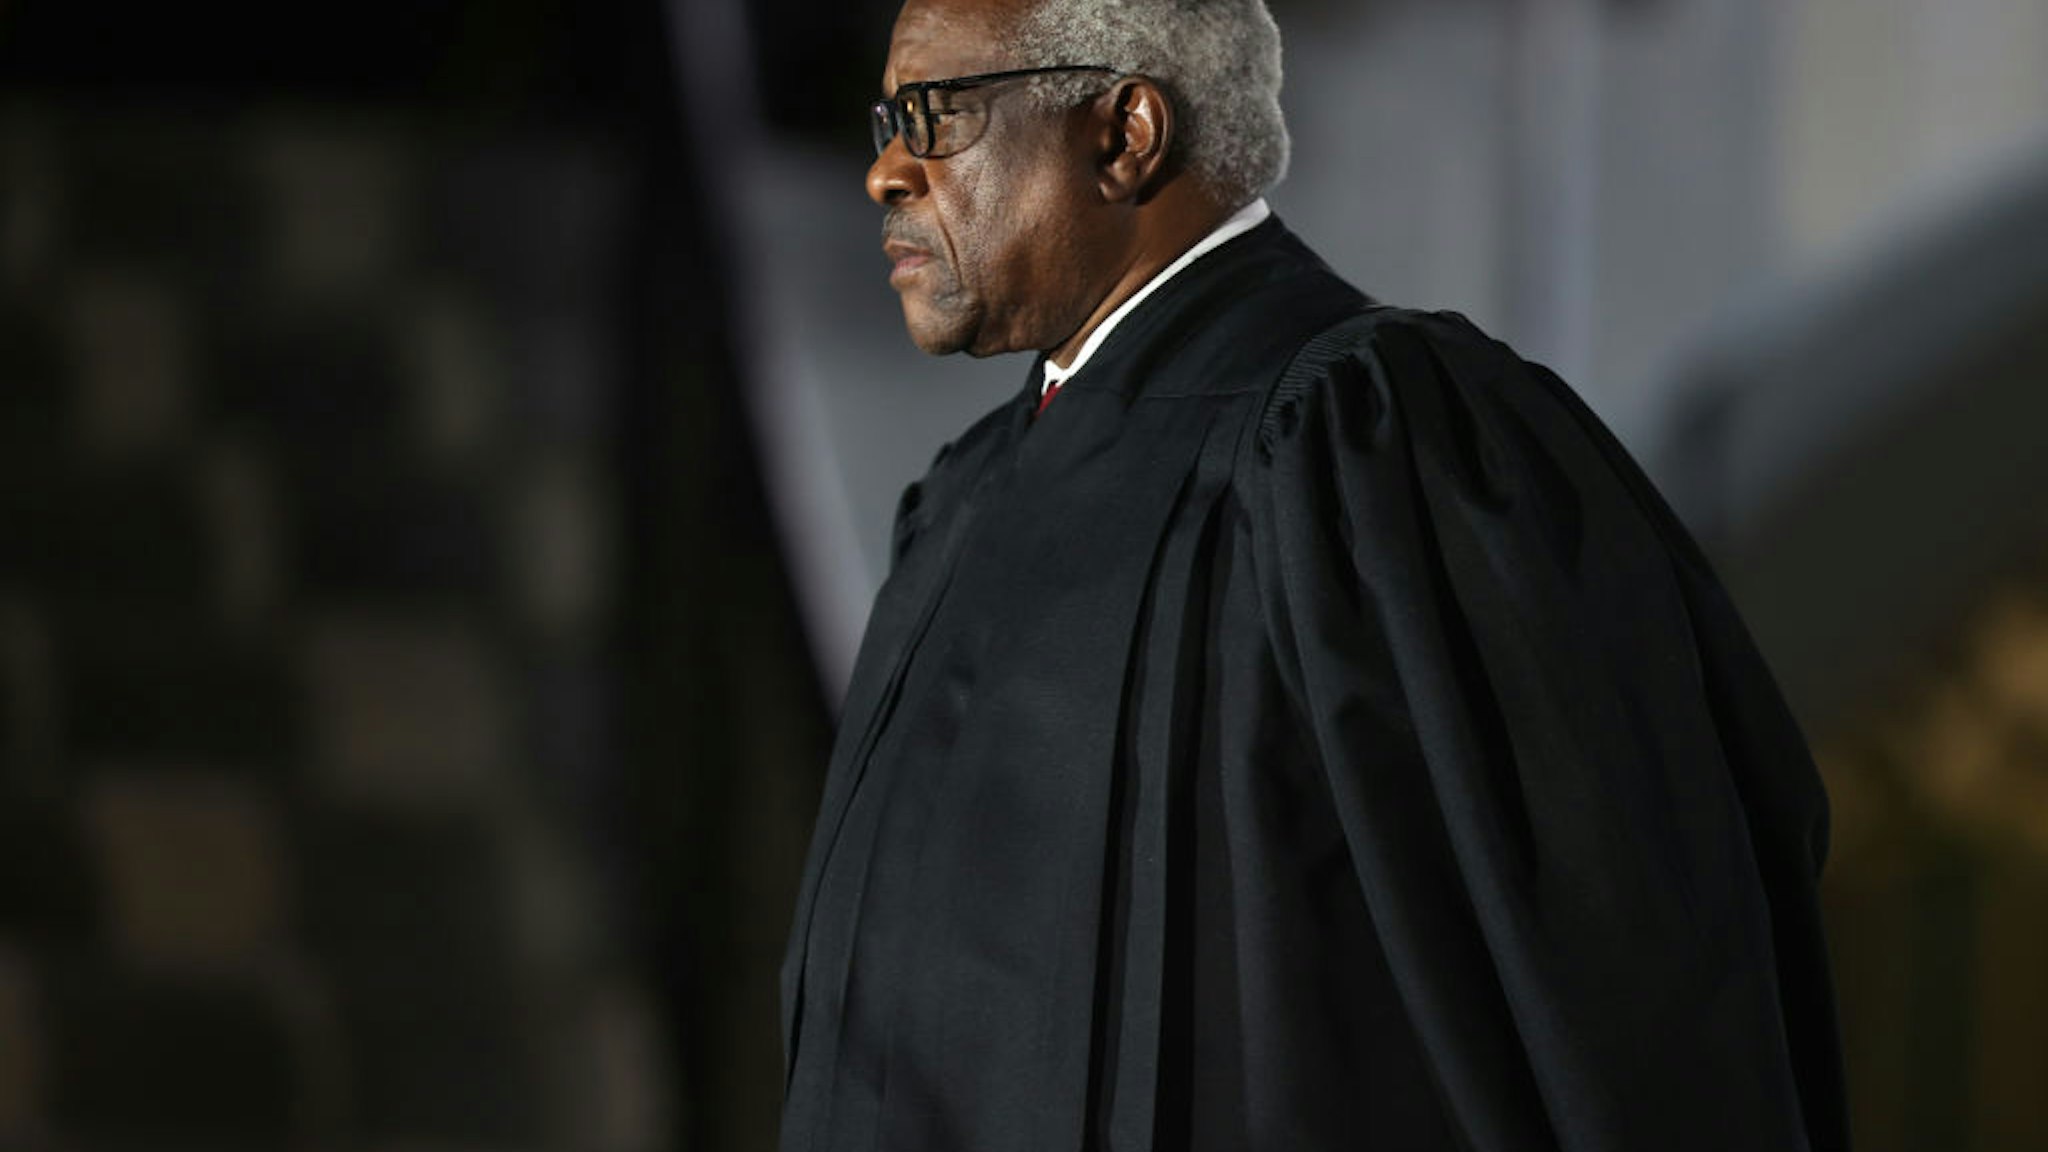 Supreme Court Associate Justice Clarence Thomas attends the ceremonial swearing-in ceremony for Amy Coney Barrett to be the U.S. Supreme Court Associate Justice on the South Lawn of the White House October 26, 2020 in Washington, DC.